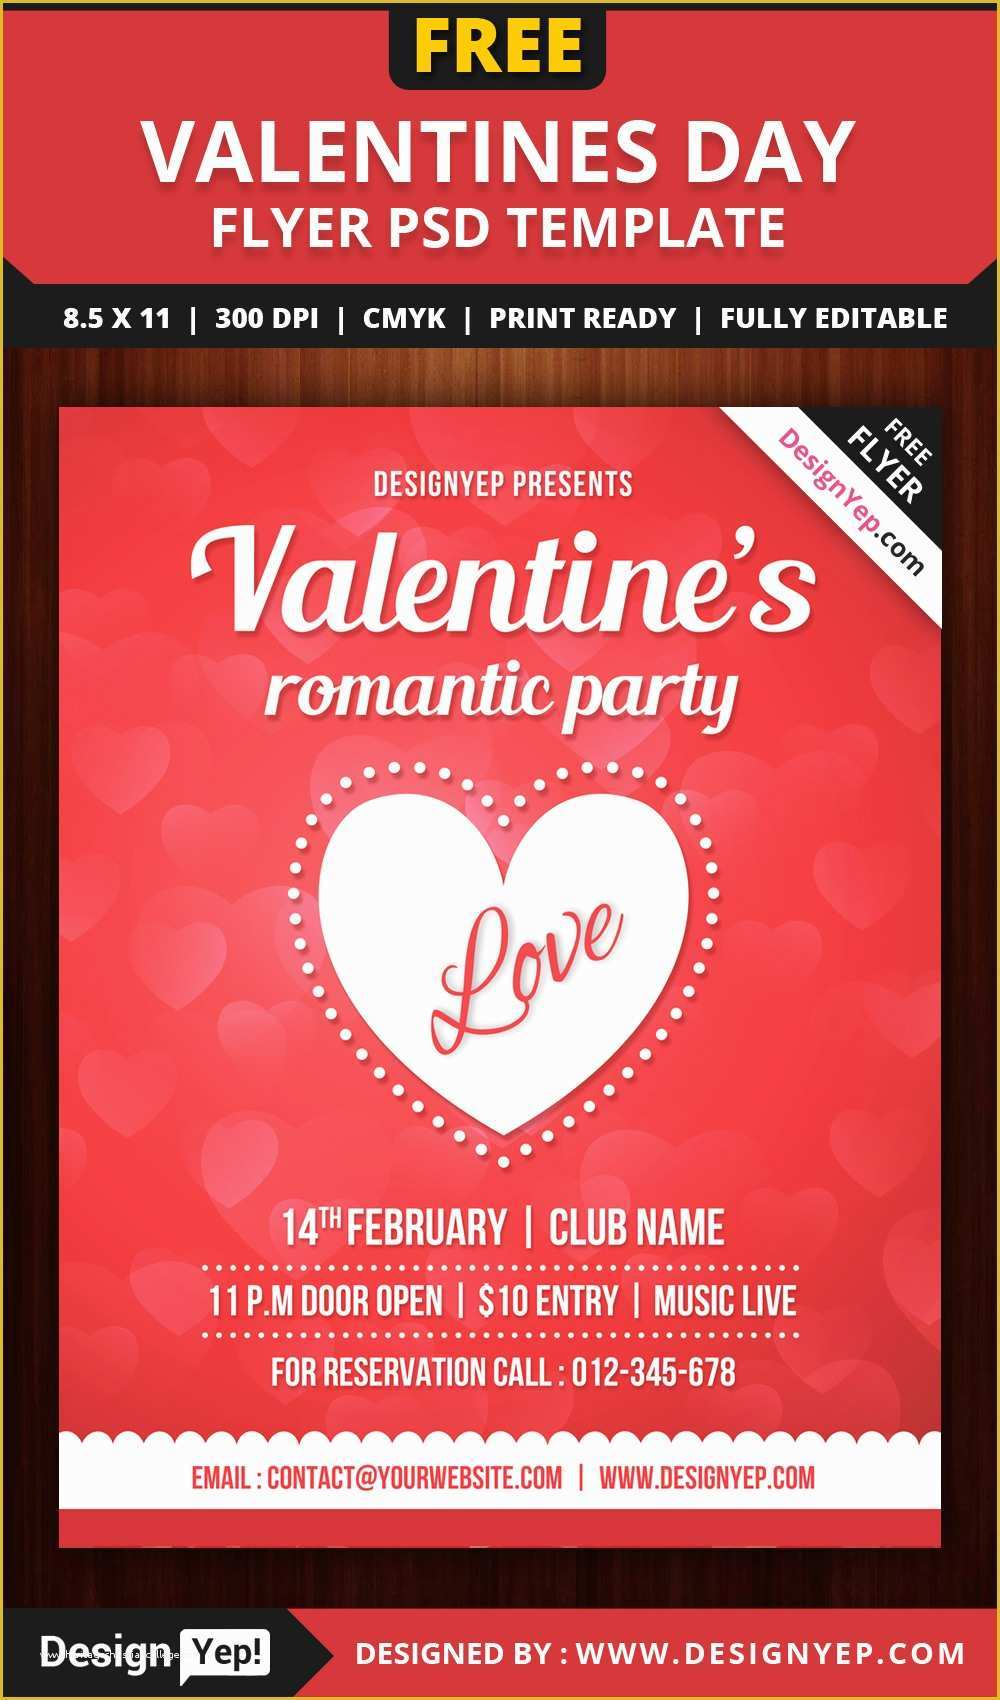 Party Flyer Template Free Of Free Valentines Party Flyer Template Psd Designyep